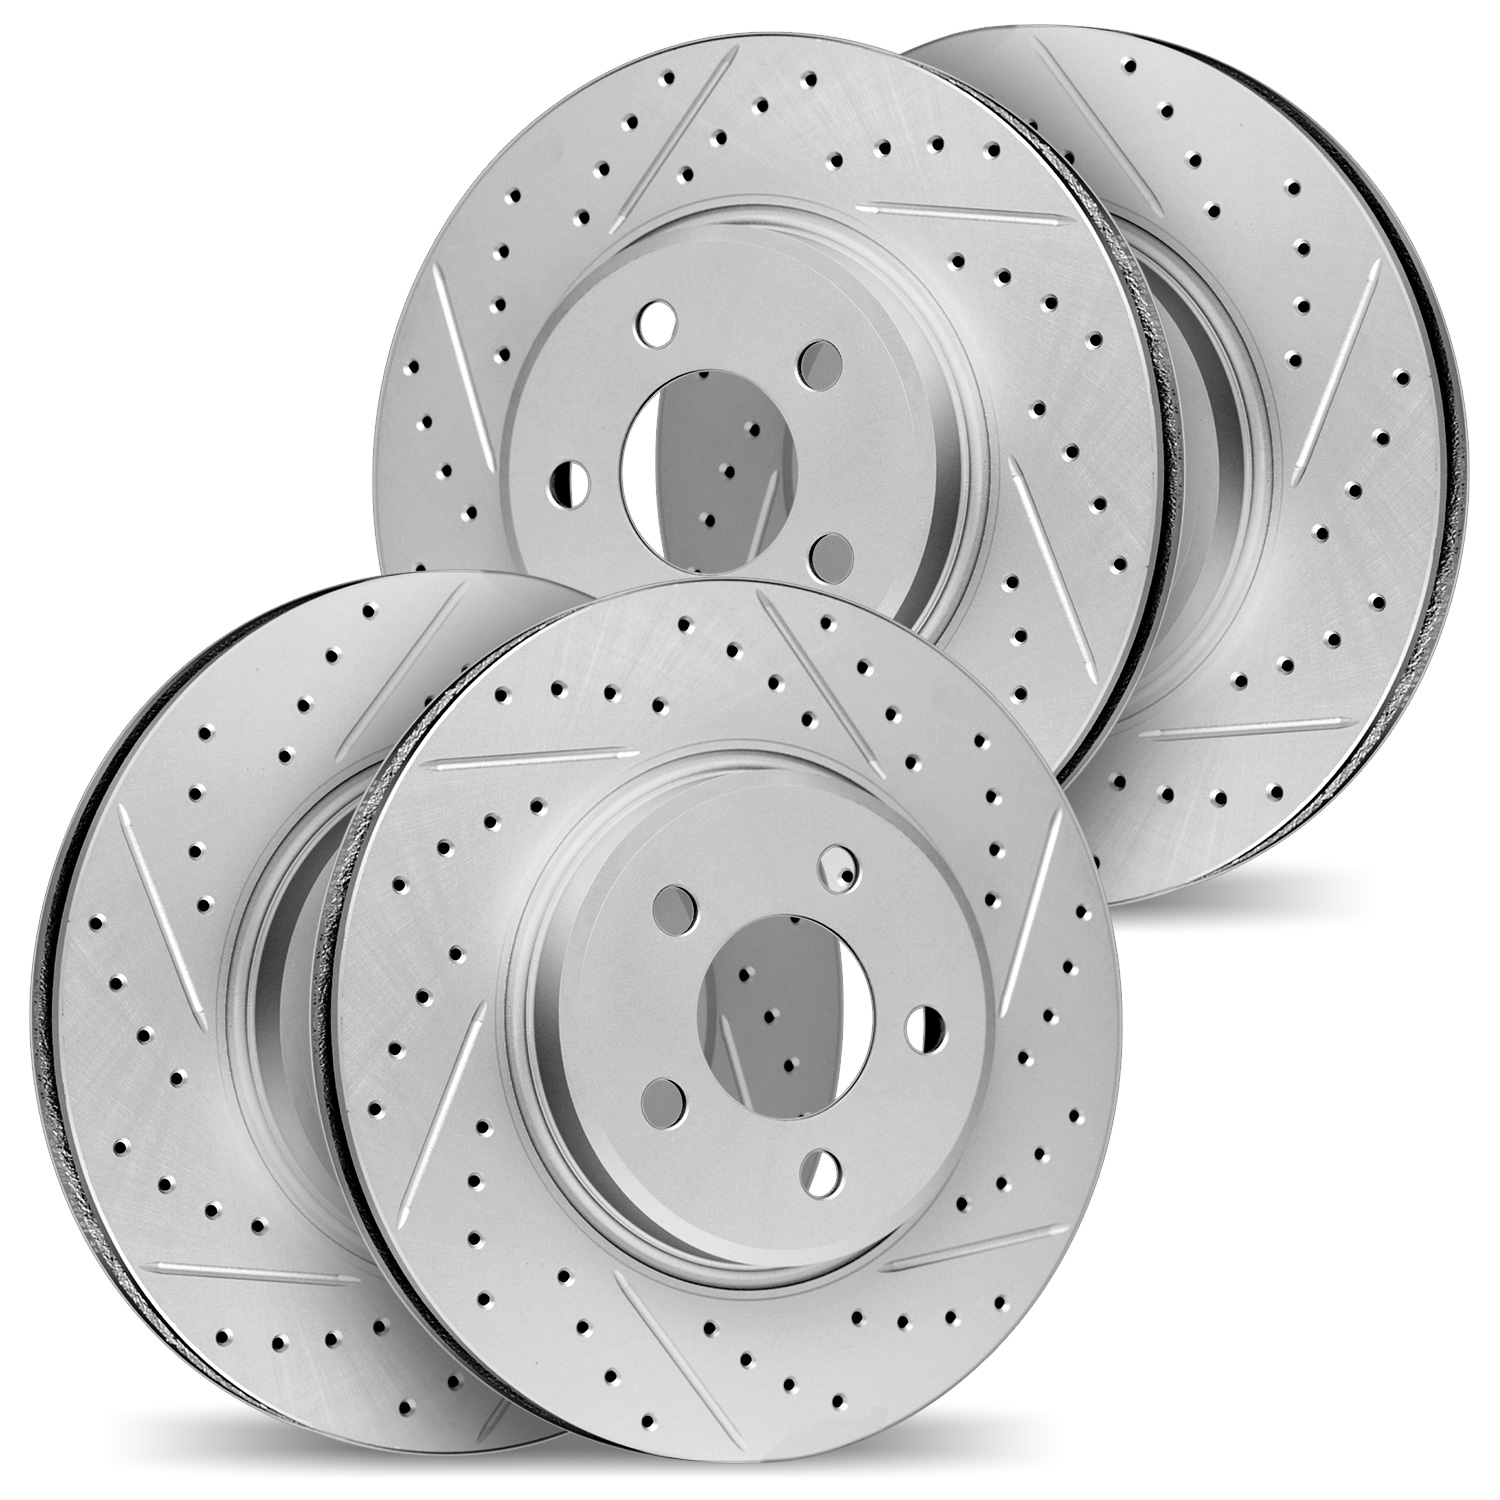 2004-46021 Geoperformance Drilled/Slotted Brake Rotors, 2009-2011 GM, Position: Front and Rear